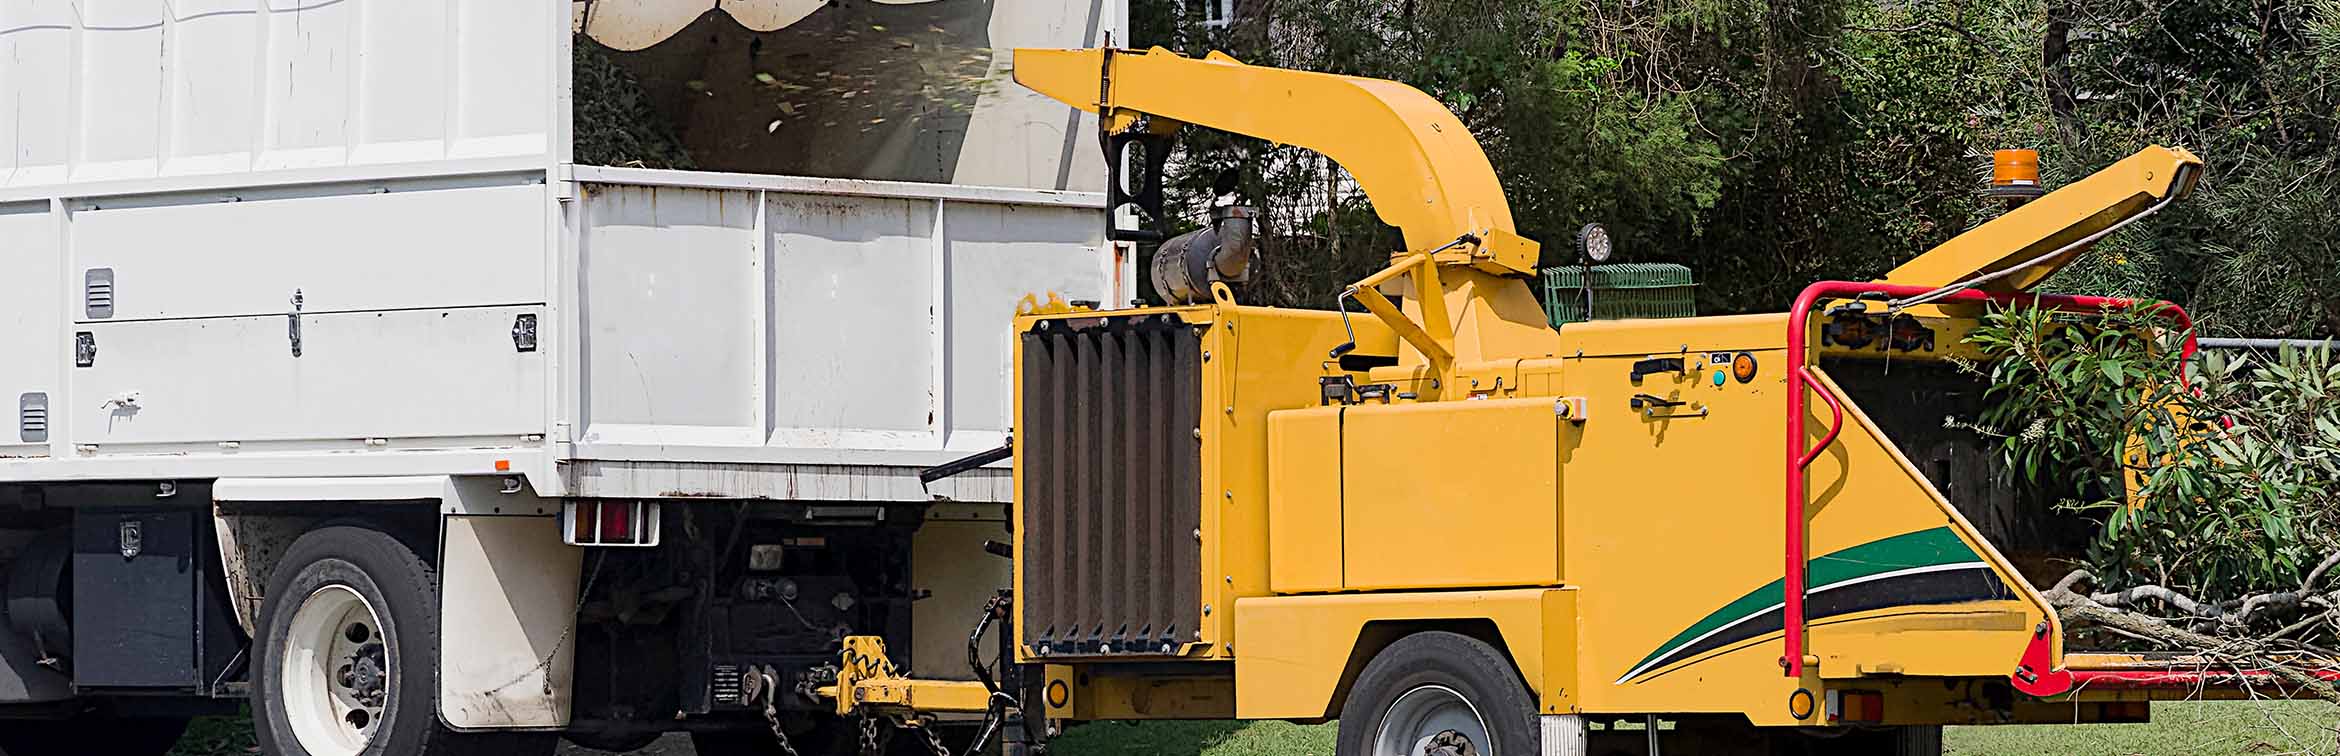 Need A Wood Chipper Here S What To Know Before You Buy